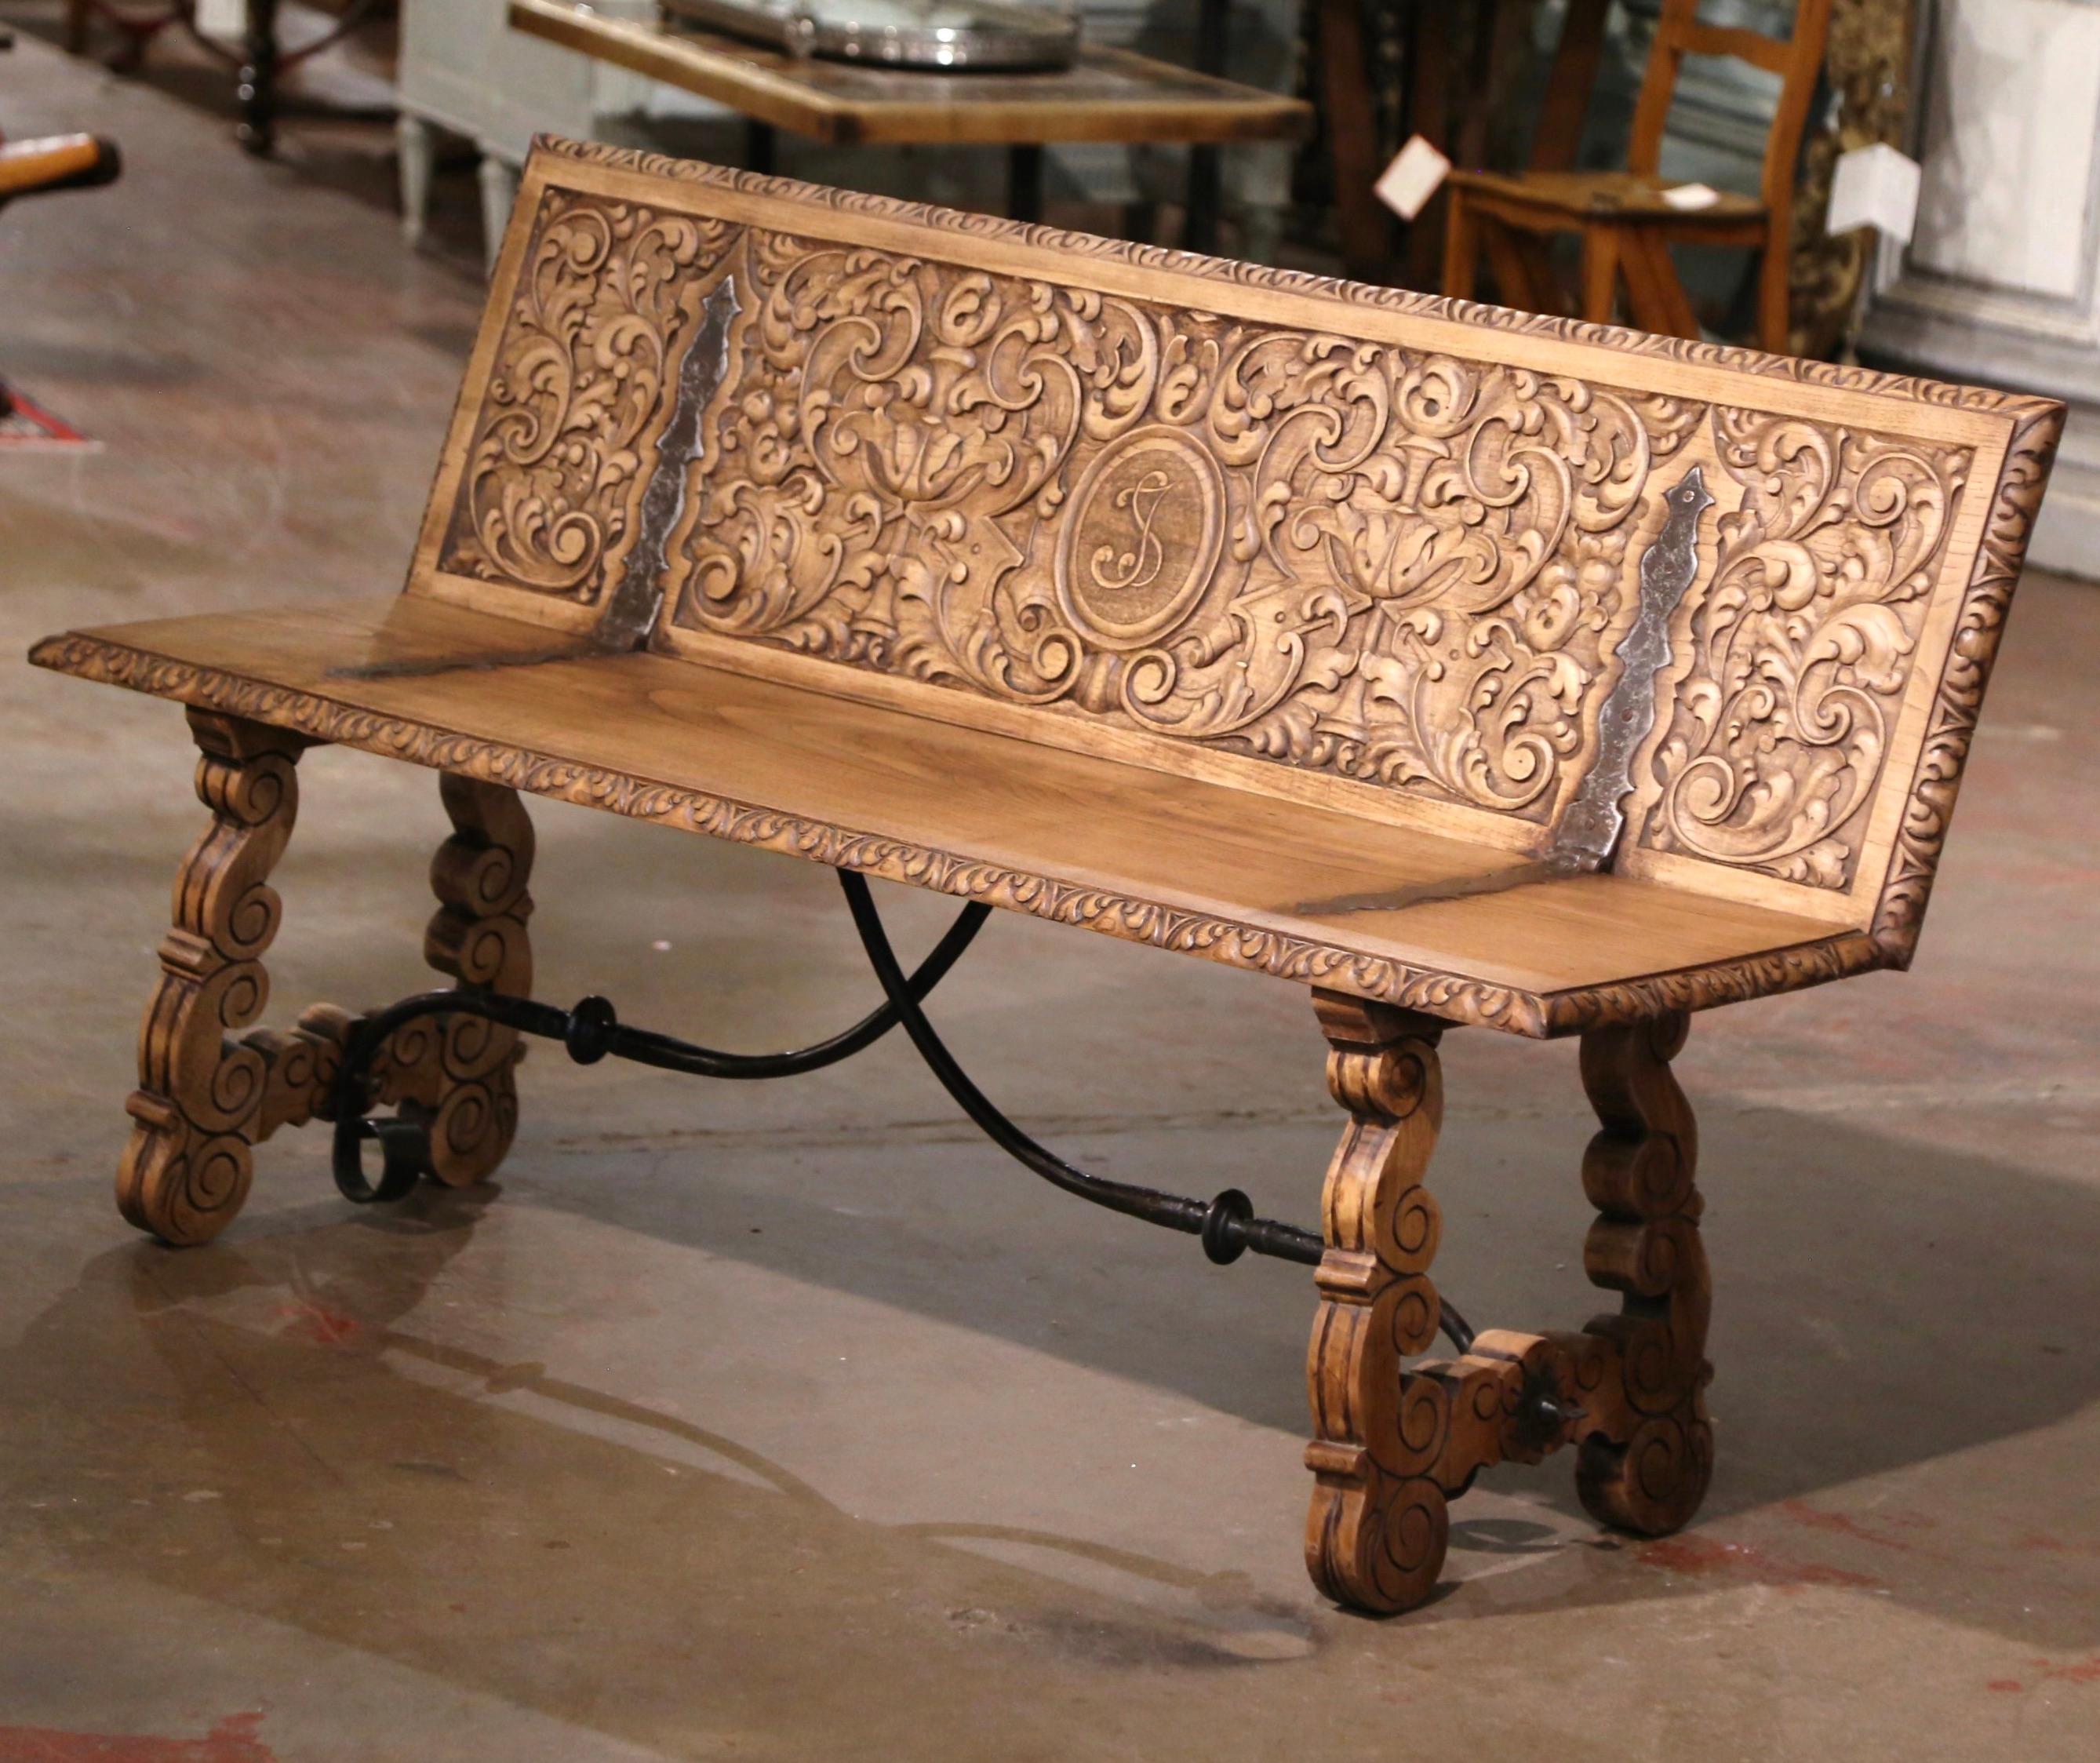 19th Century Spanish Renaissance Carved Bleached Chestnut and Iron Bench In Excellent Condition For Sale In Dallas, TX